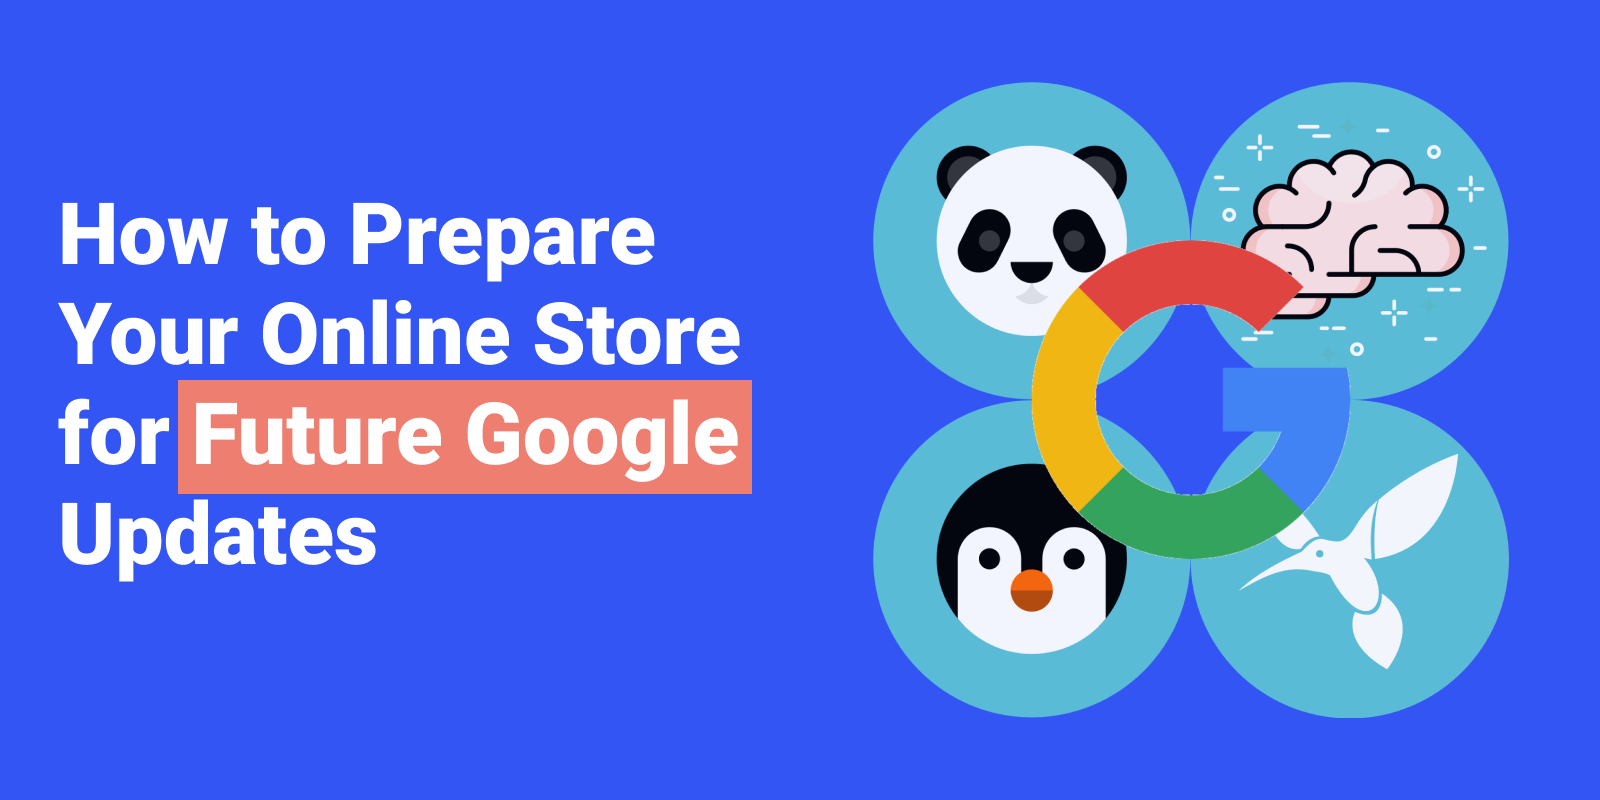 How to Prepare Your Online Store for Future Google Updates